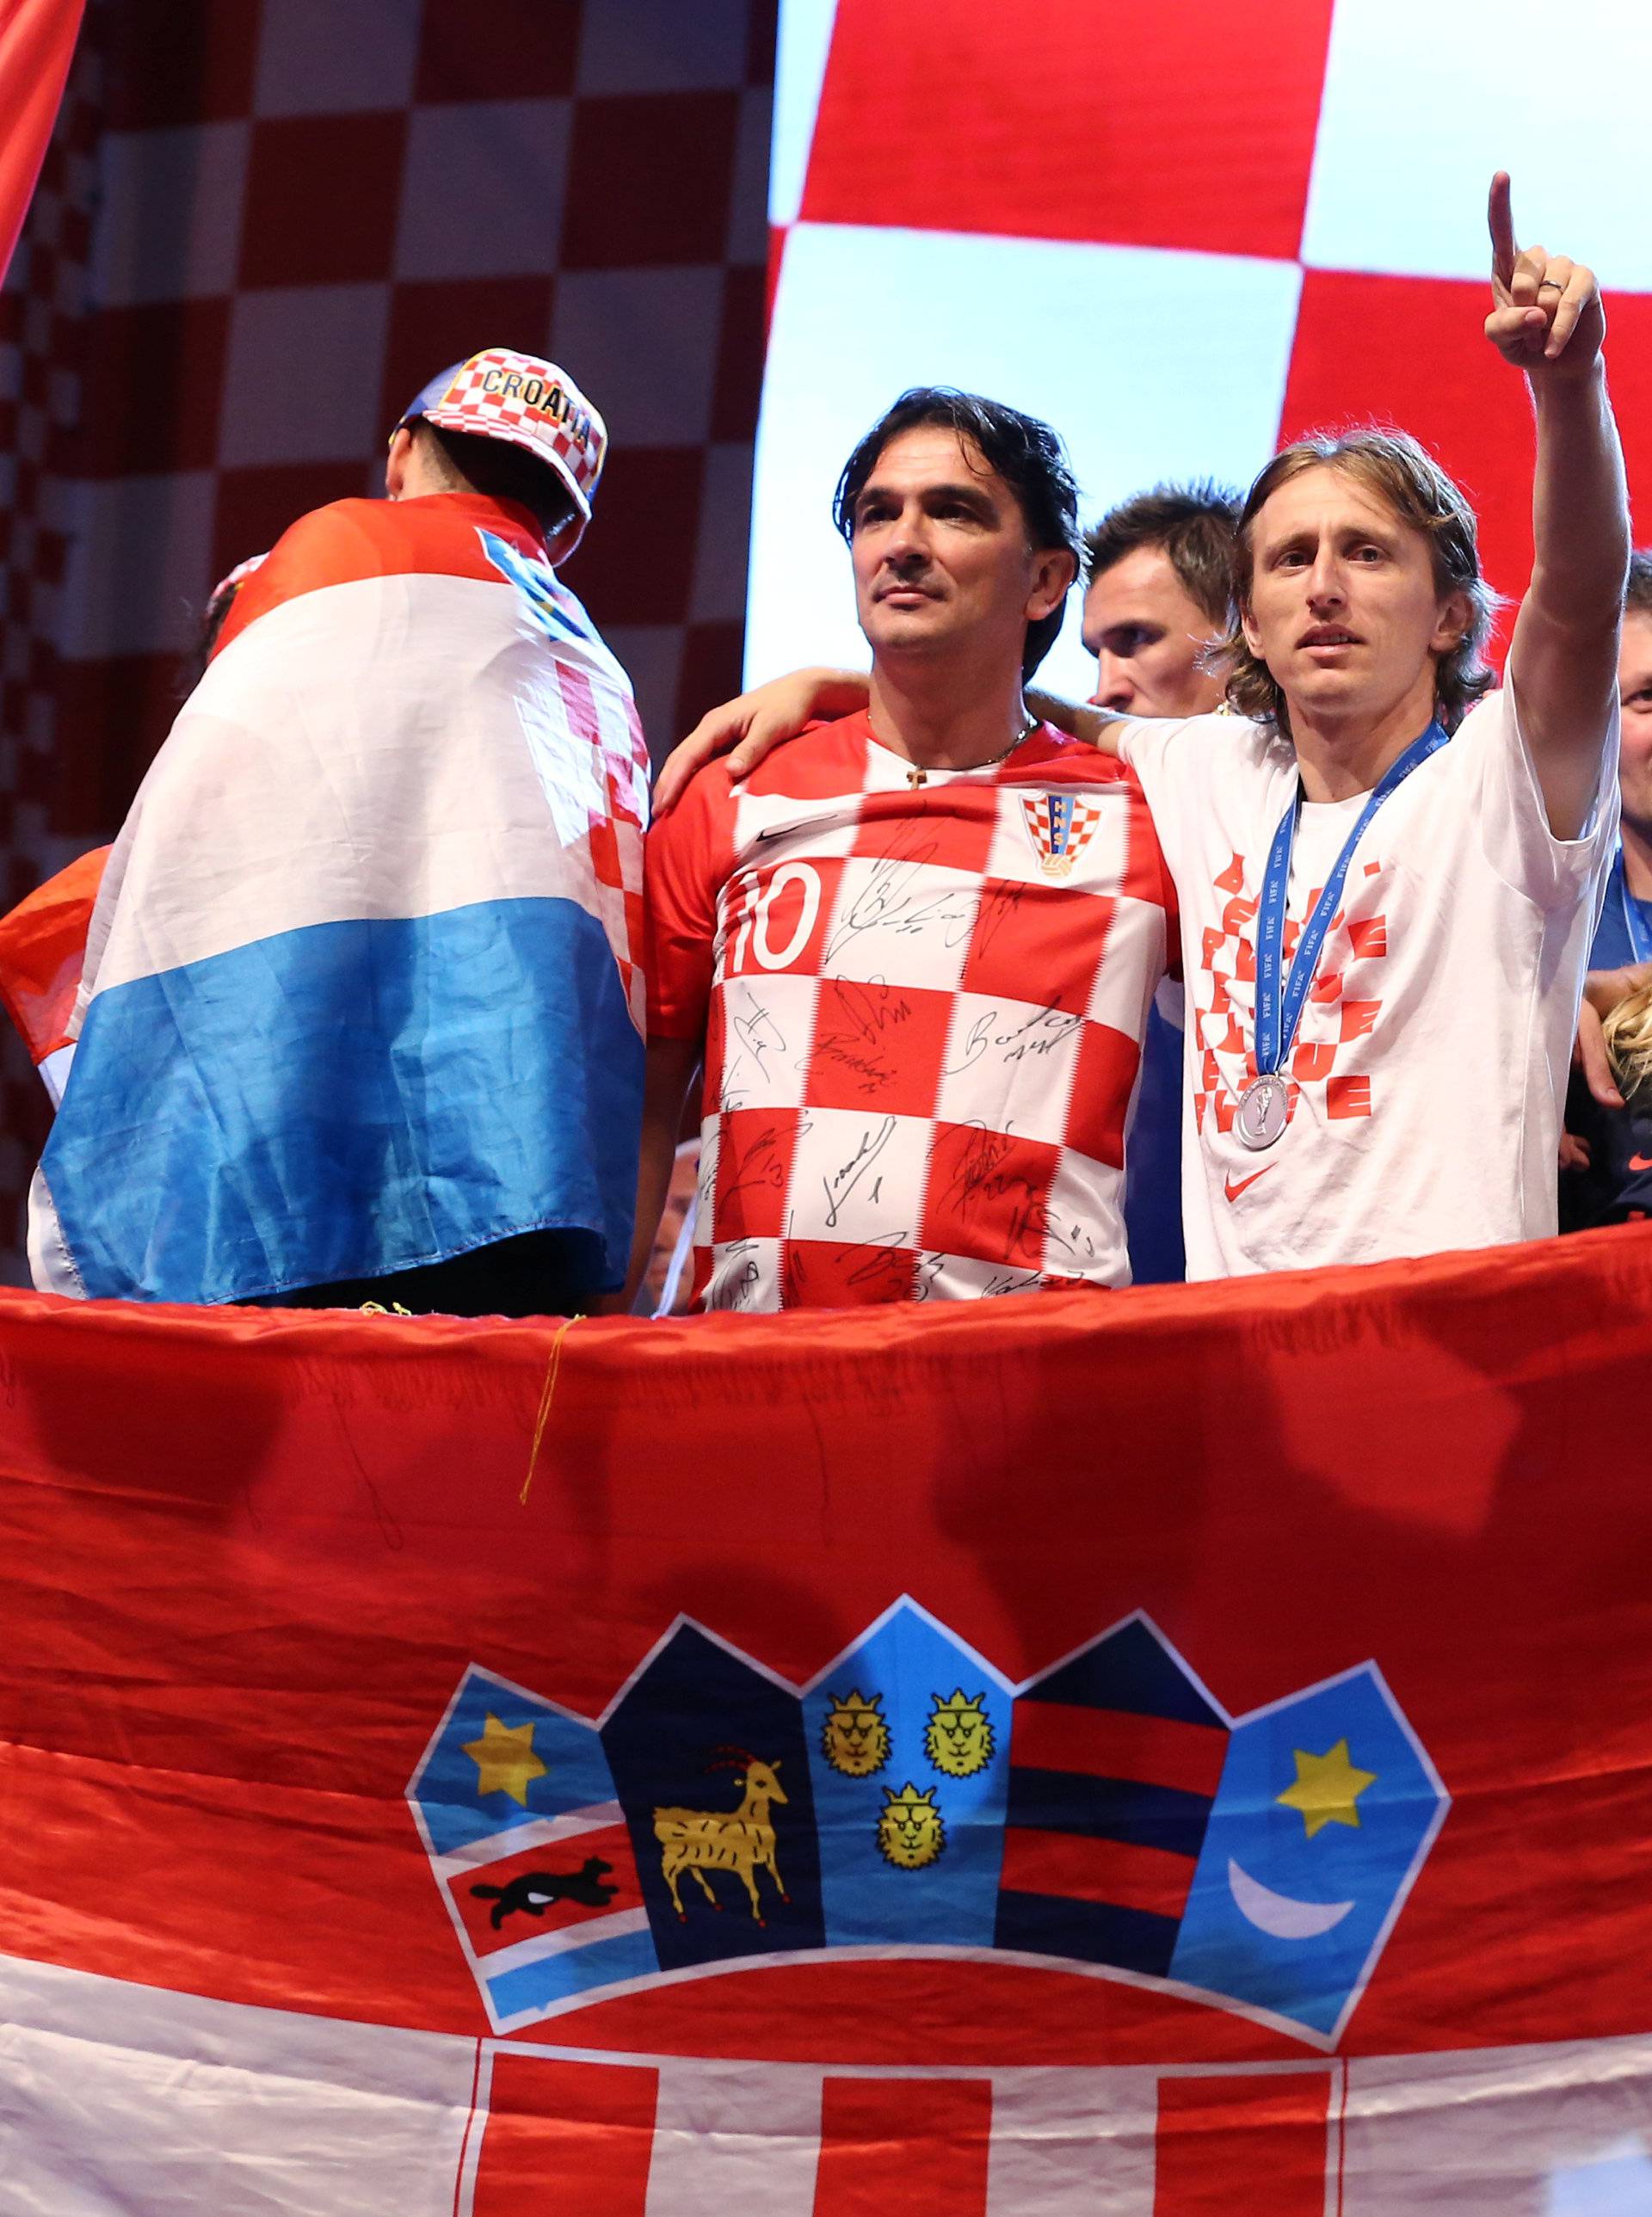 World Cup - The Croatia team return from the World Cup in Russia